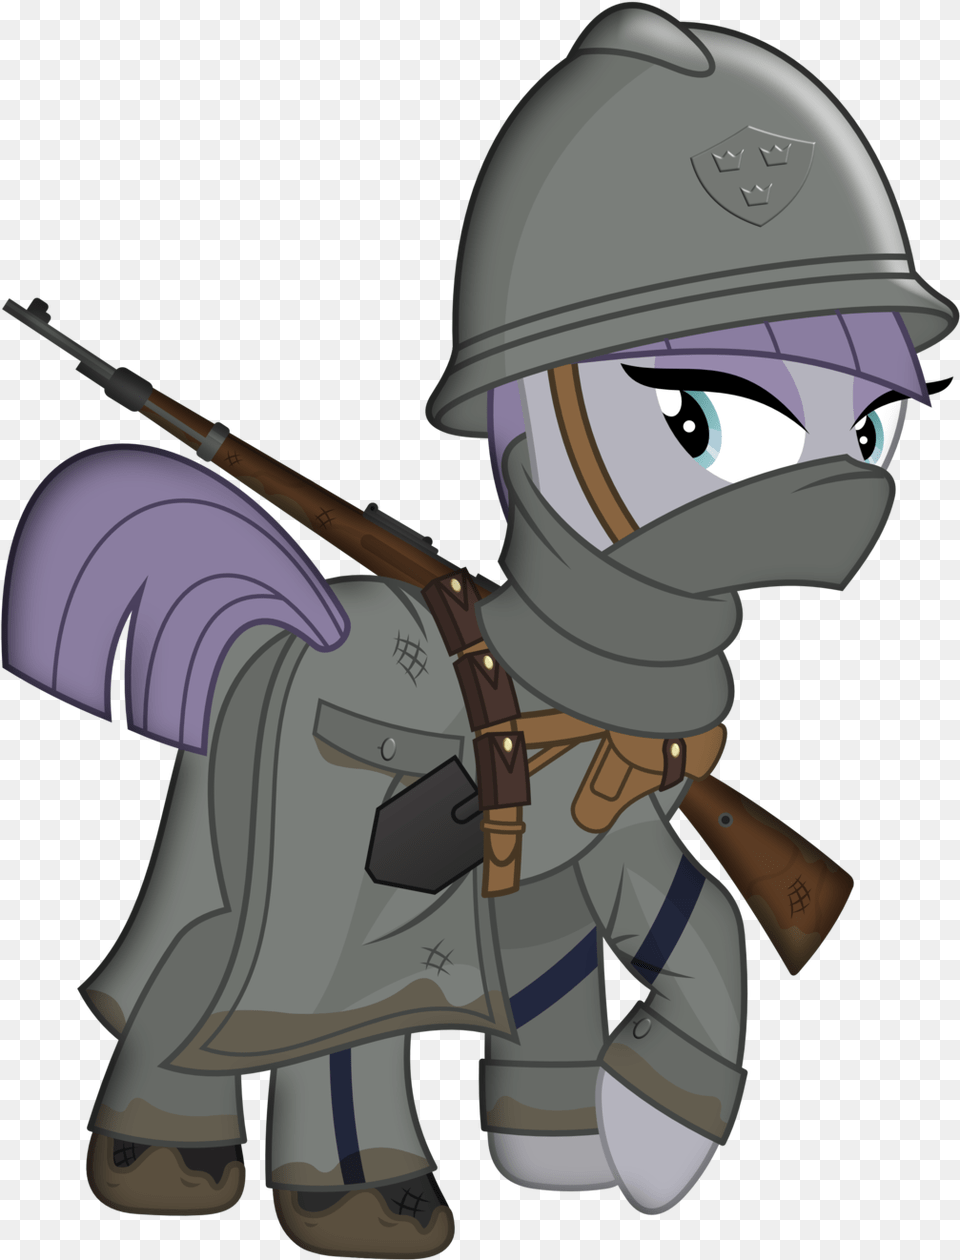 Brony Works Boots Gun Helmet Maud Pie Military My Little Pony Friendship Is Magic, Firearm, Rifle, Weapon, Person Free Transparent Png